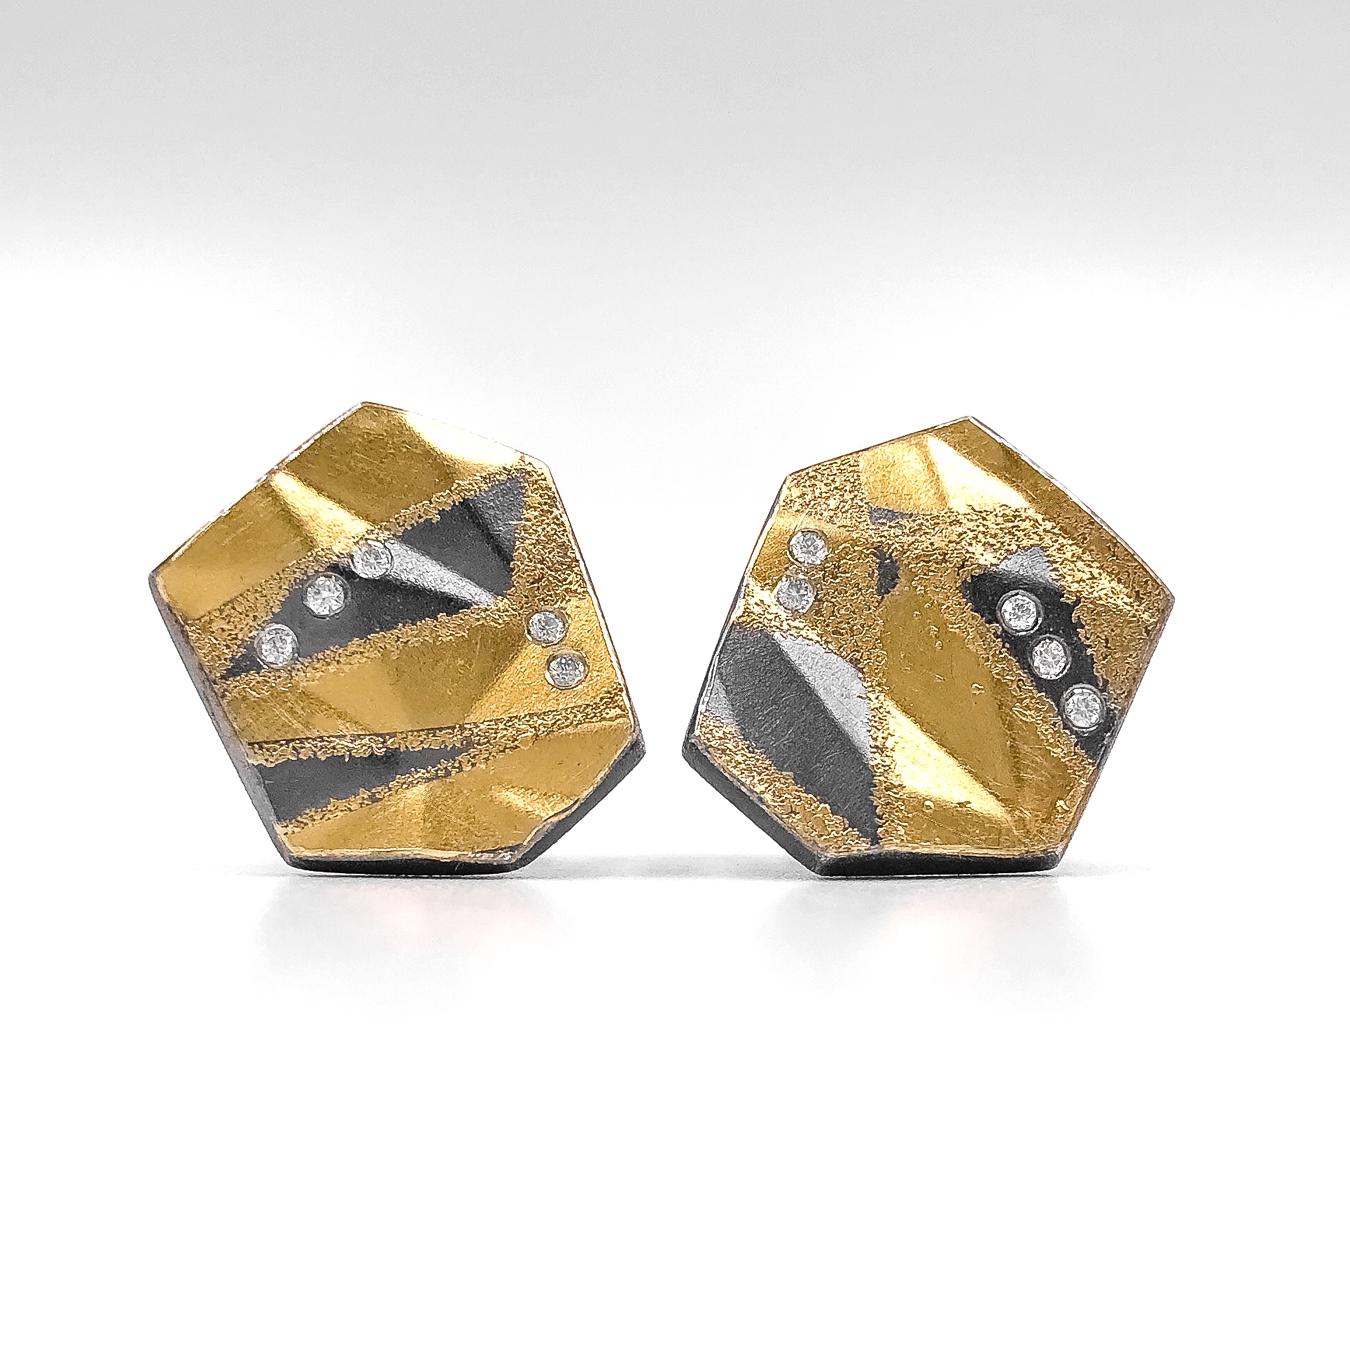 One of a Kind Fold Earrings hand-fabricated in 2019 in Germany by award-winning jewelry maker Atelier Zobel - Peter Schmid in 24k yellow gold and oxidized sterling silver with ten round brilliant-cut diamonds totaling 0.10 carats. Earrings come with